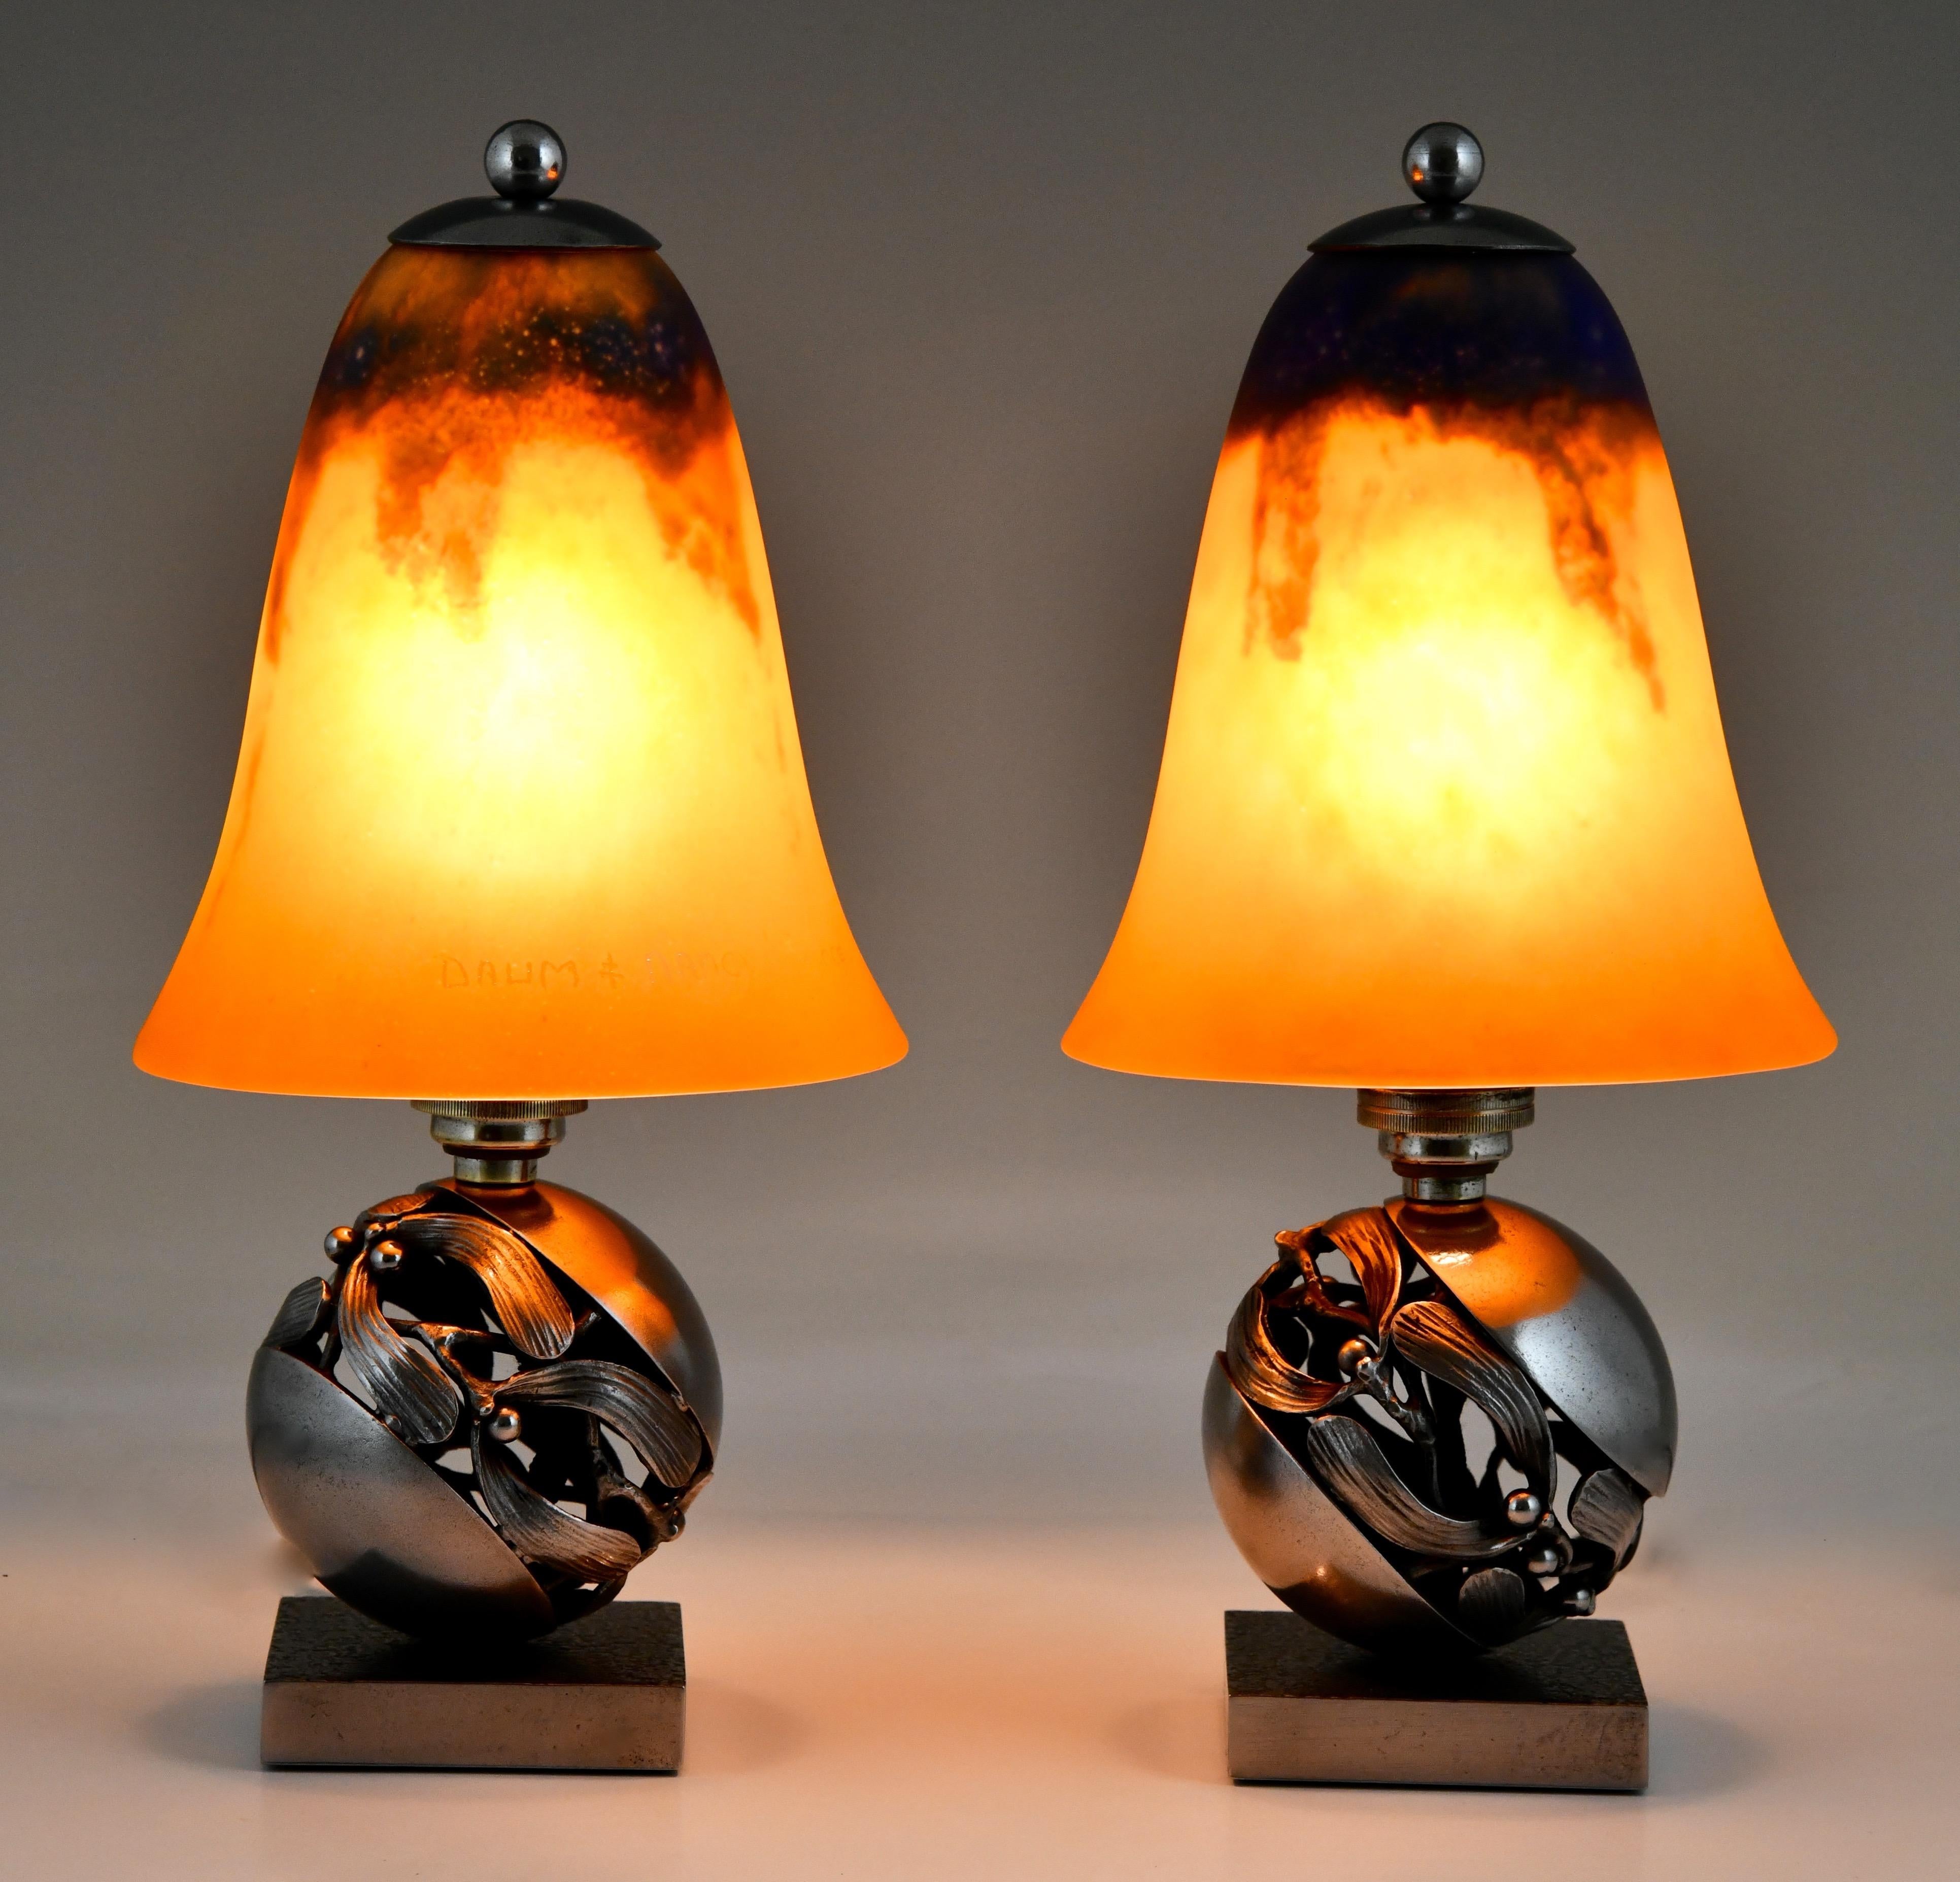 Pair of Mistletoe or Boule de Gui Art Deco table lamps by Edgar Brandt and Daum. 
Wrought iron lamp bases stamped E. Brandt.
Orange and bleu pâte de verre glass shades signed Daum Nancy. 
France 1925.
This model -as paperweight- is illustrated on